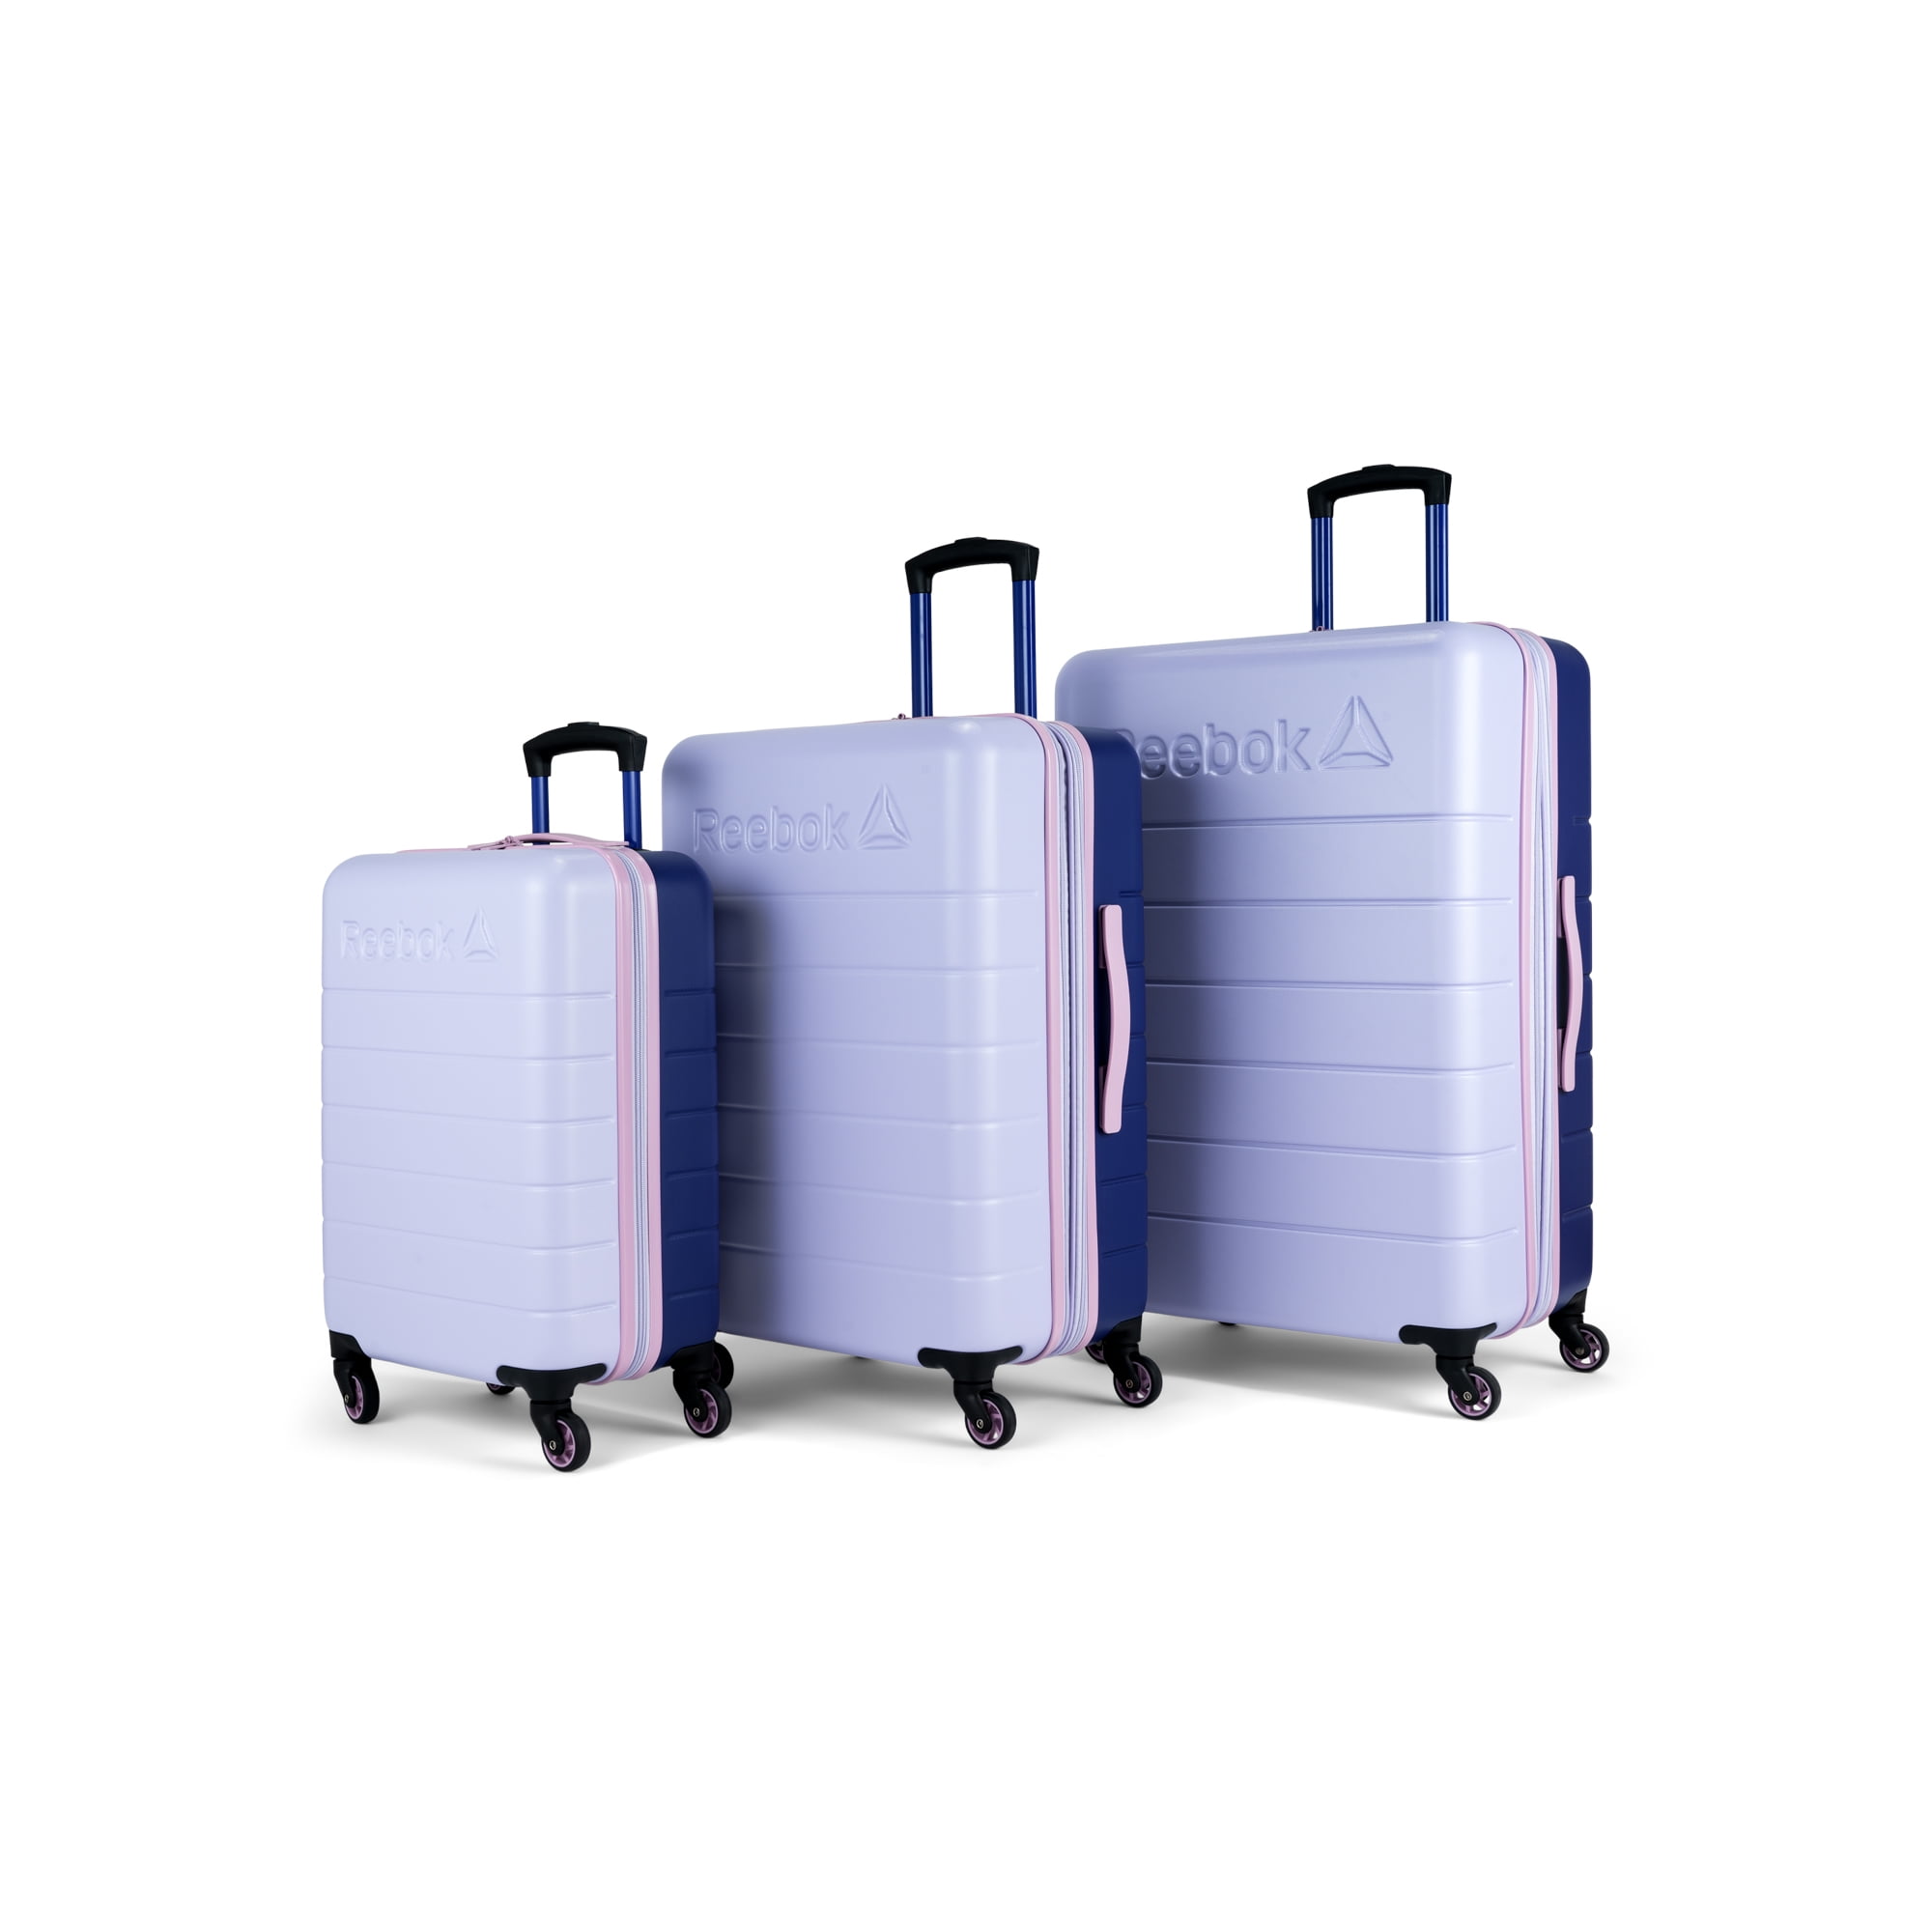 Reebok- Double Dribble Collection - 3 piece hardside set luggage nested ...